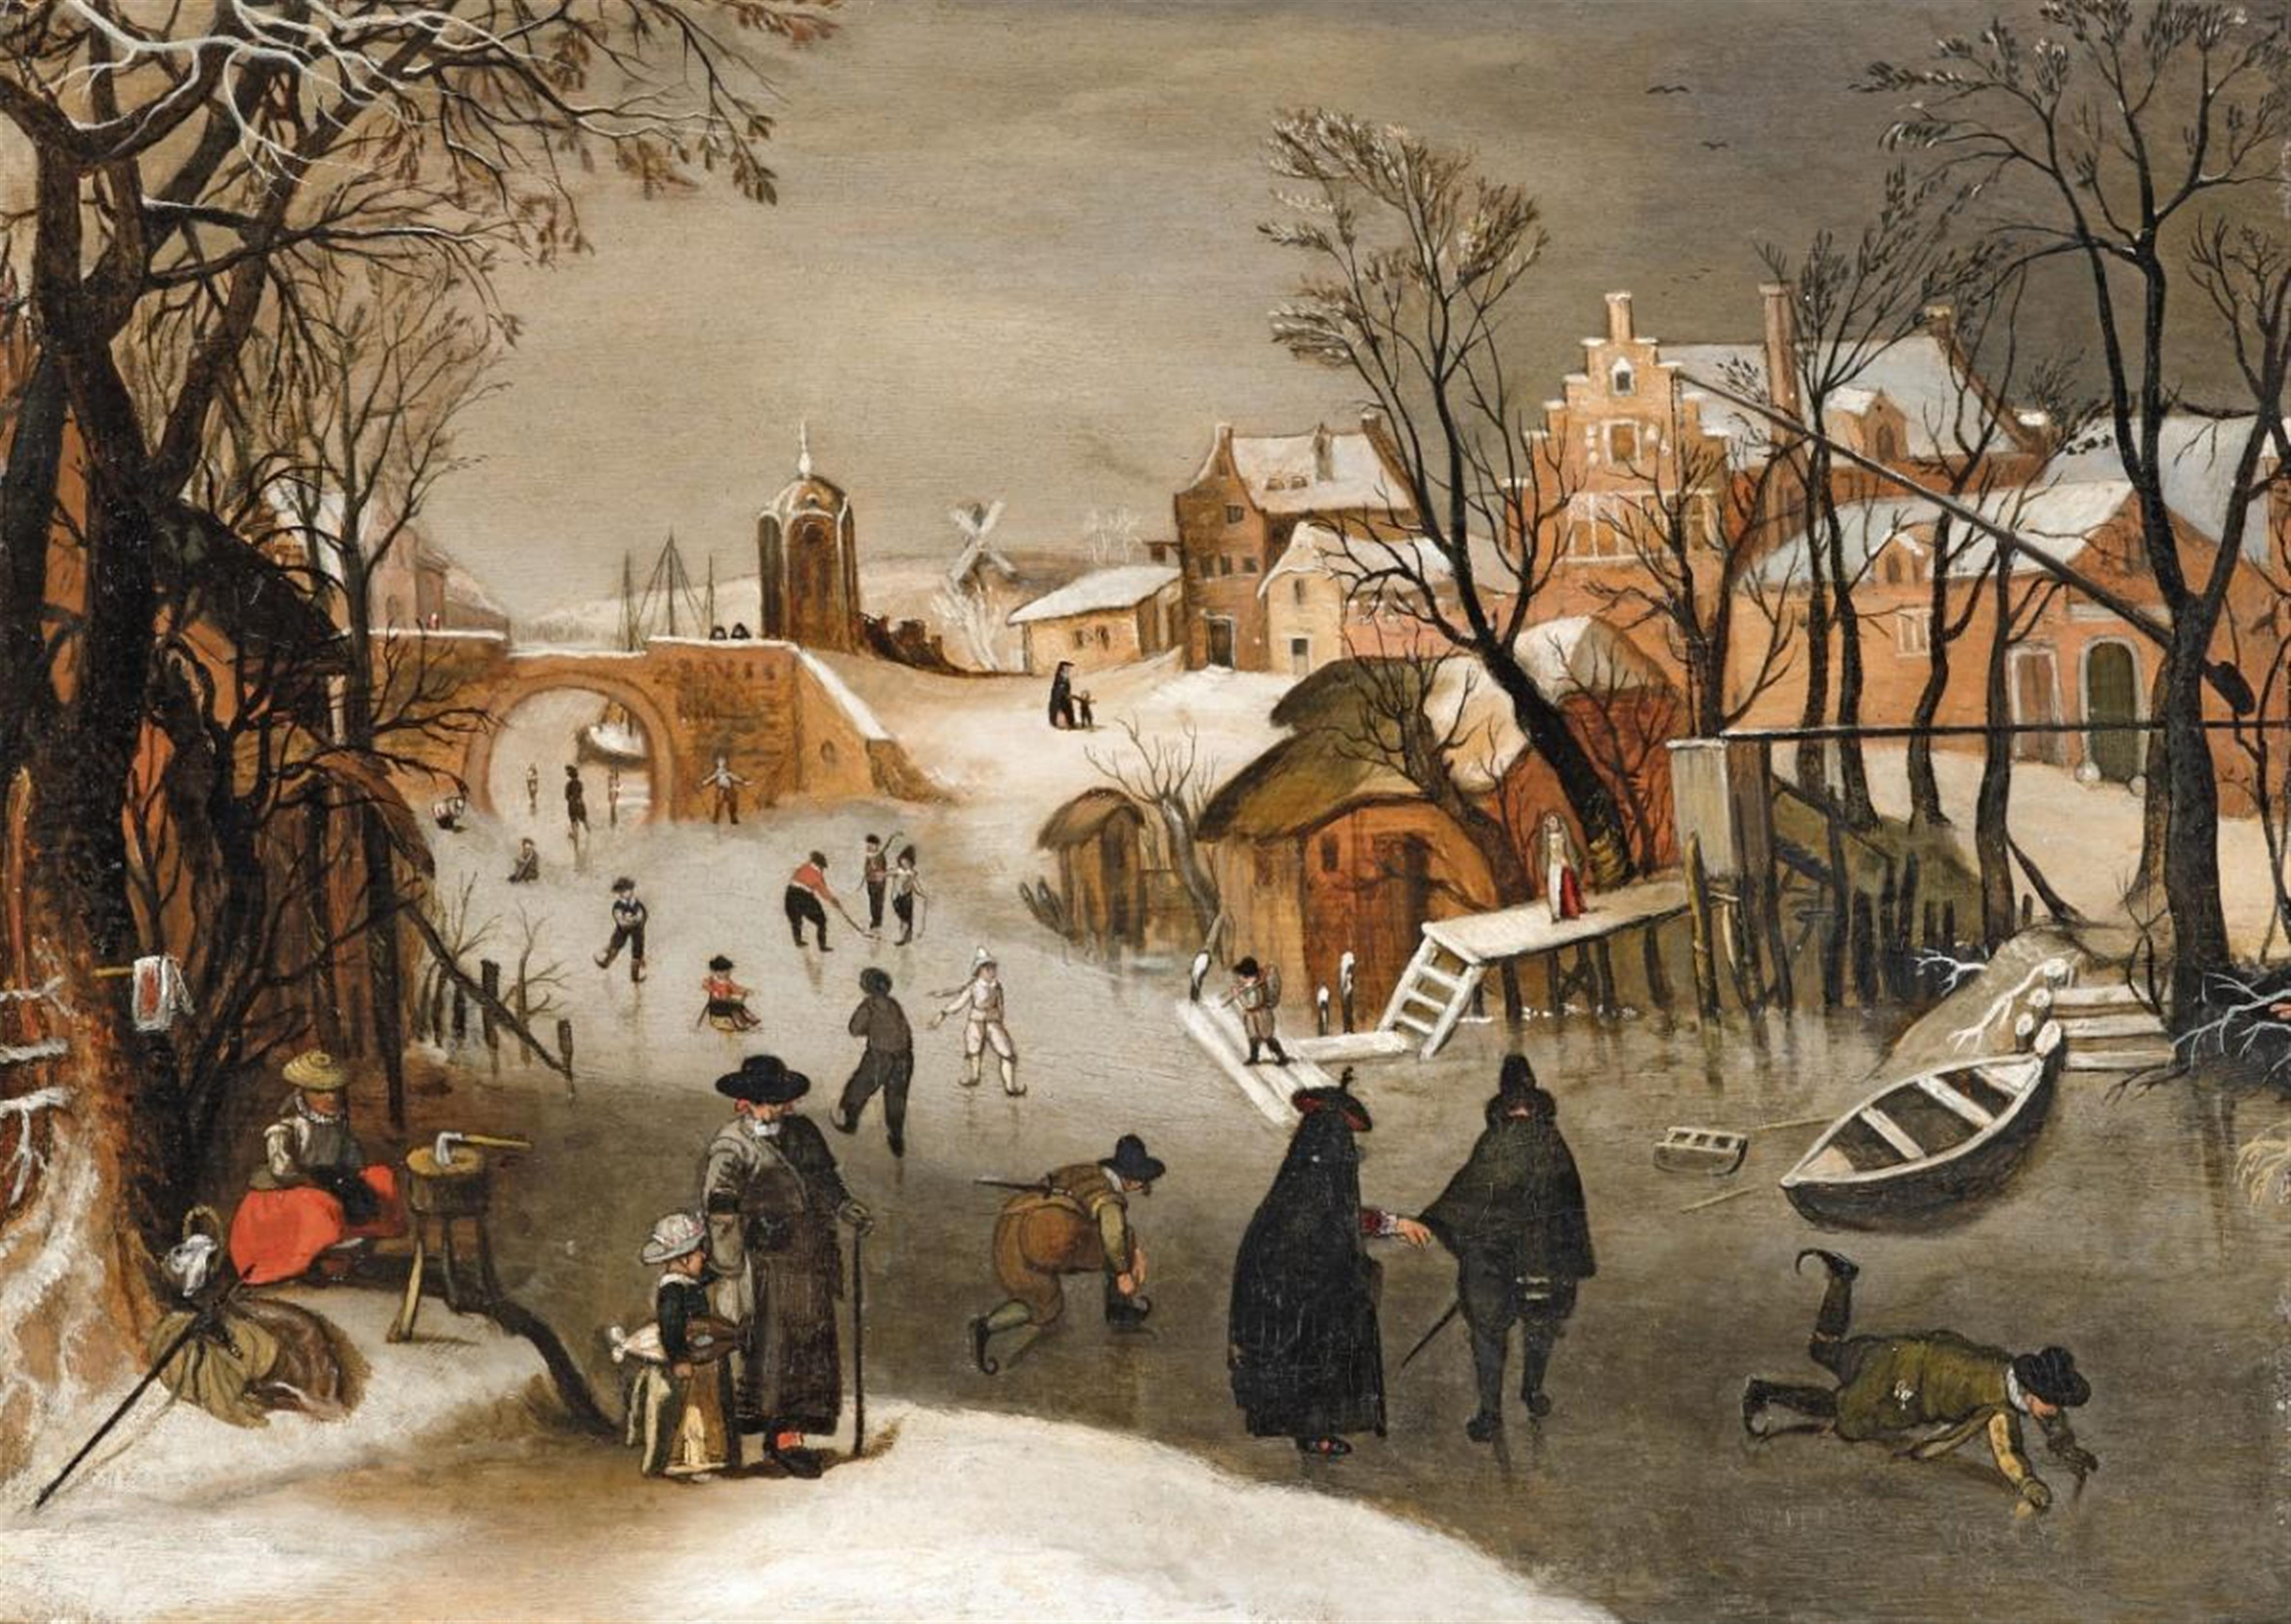 Sebastiaan Vrancx - A Winter Landscape with Skaters on a Frozen Canal - image-1